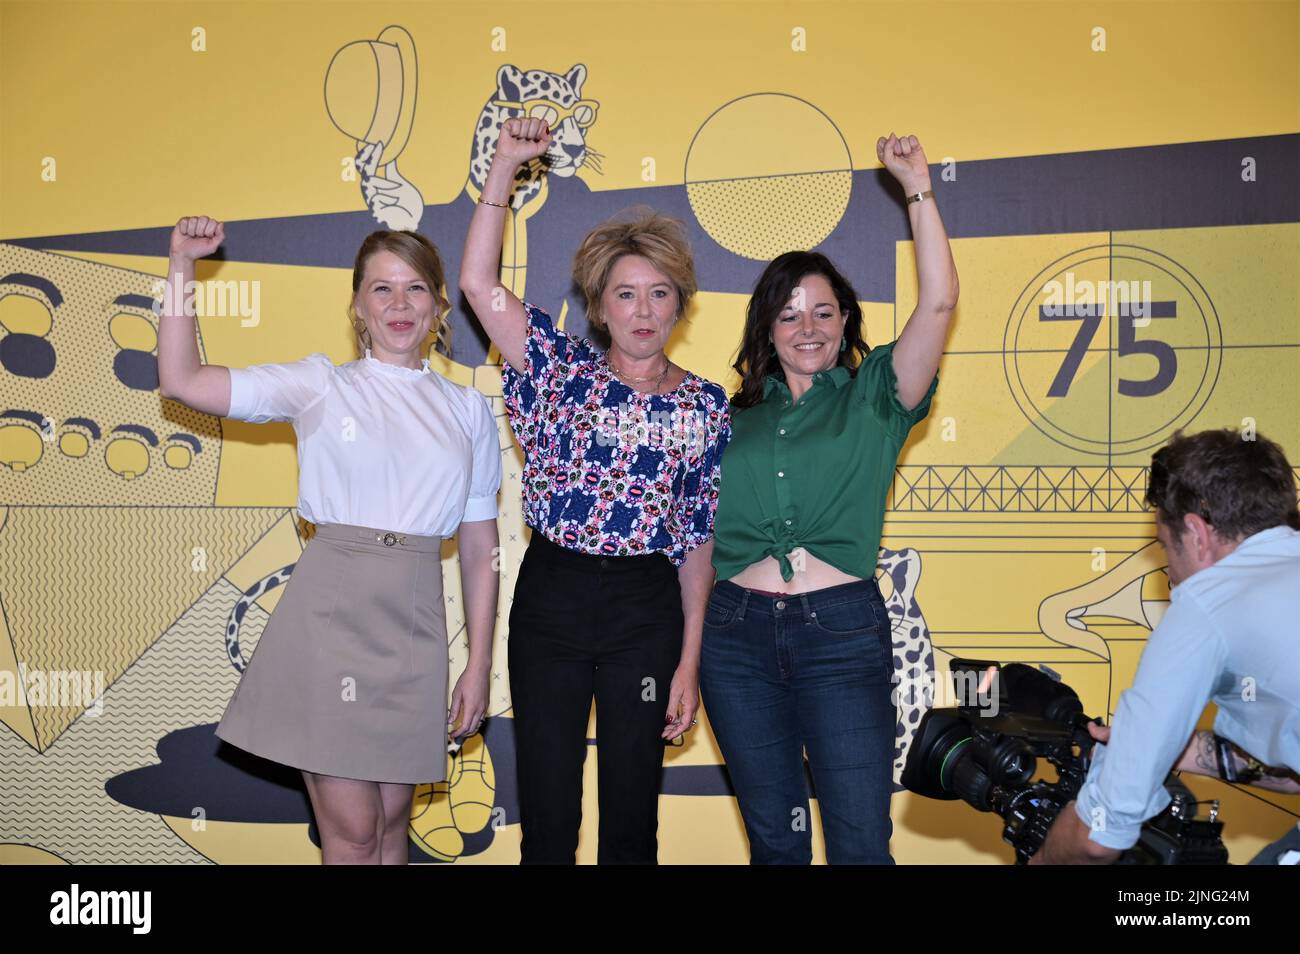 Locarno, Switzerland. 11th Aug, 2022. Locarno, Swiss Locarno Film Festival 2022 ANNIE COLERE photocall film cast, producer In the picture: Blandine Lenoir director Credit: Independent Photo Agency/Alamy Live News Stock Photo